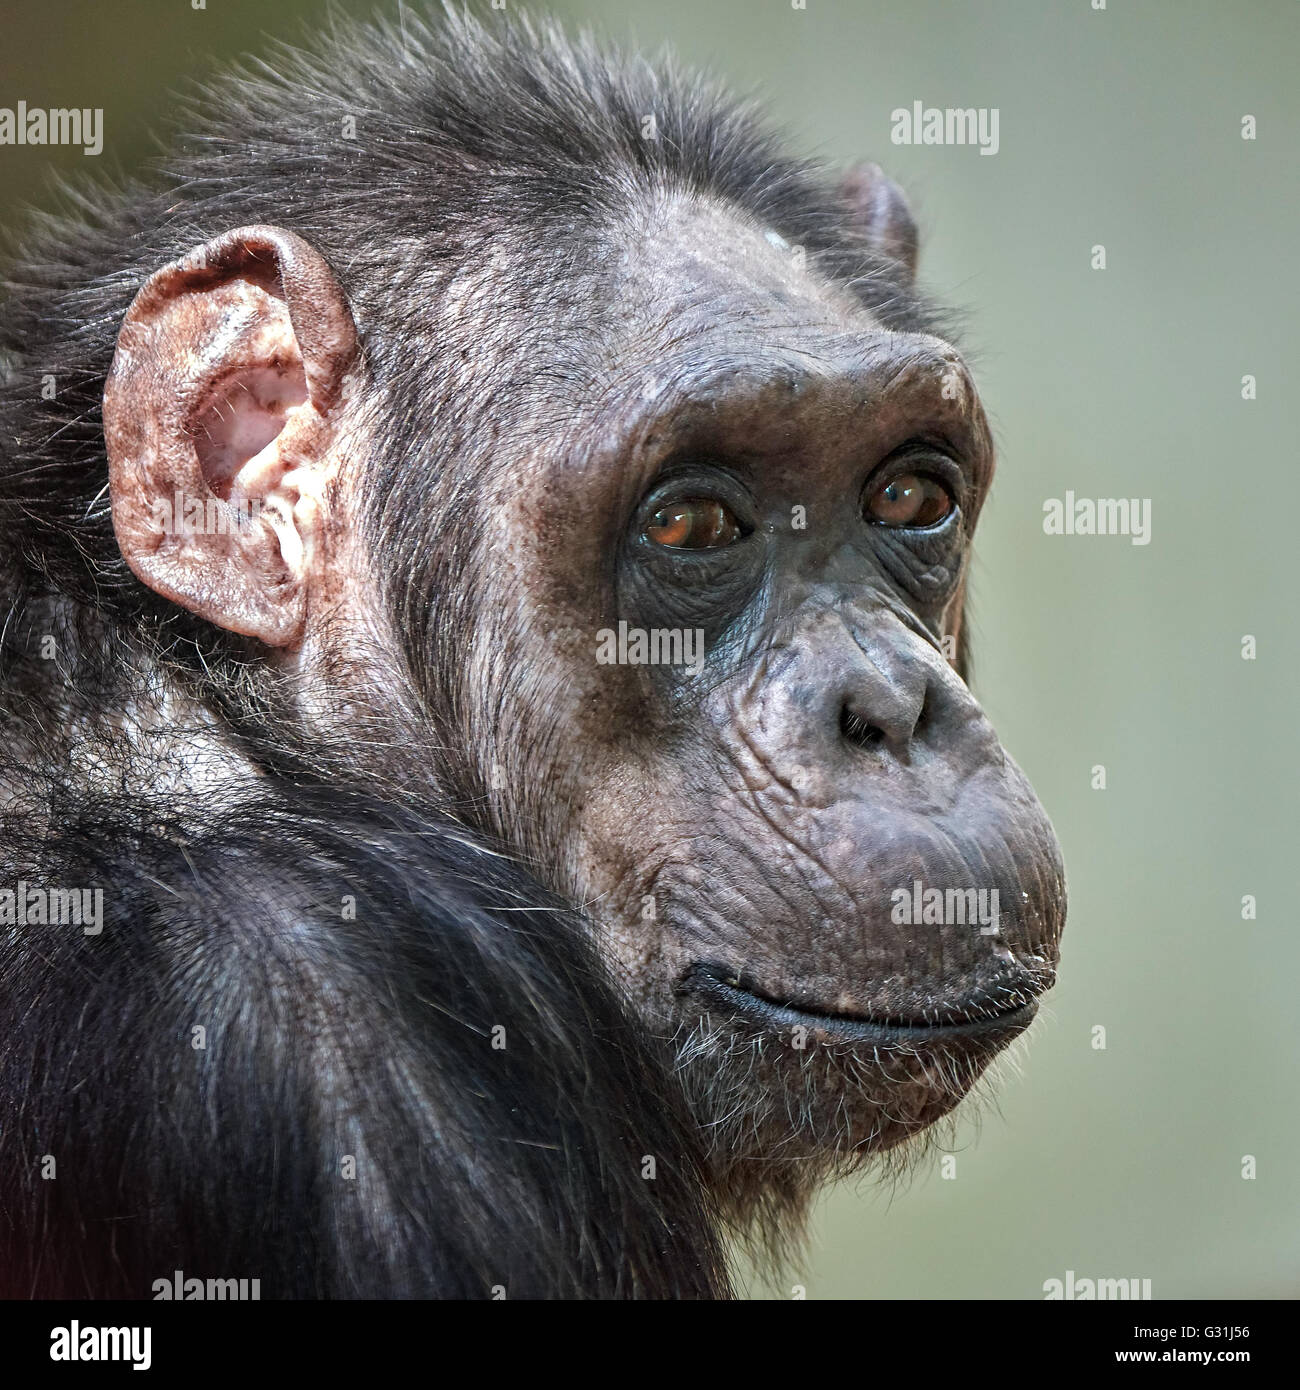 Closeup portrait of a Common Chimpanzee with eye contact Stock Photo